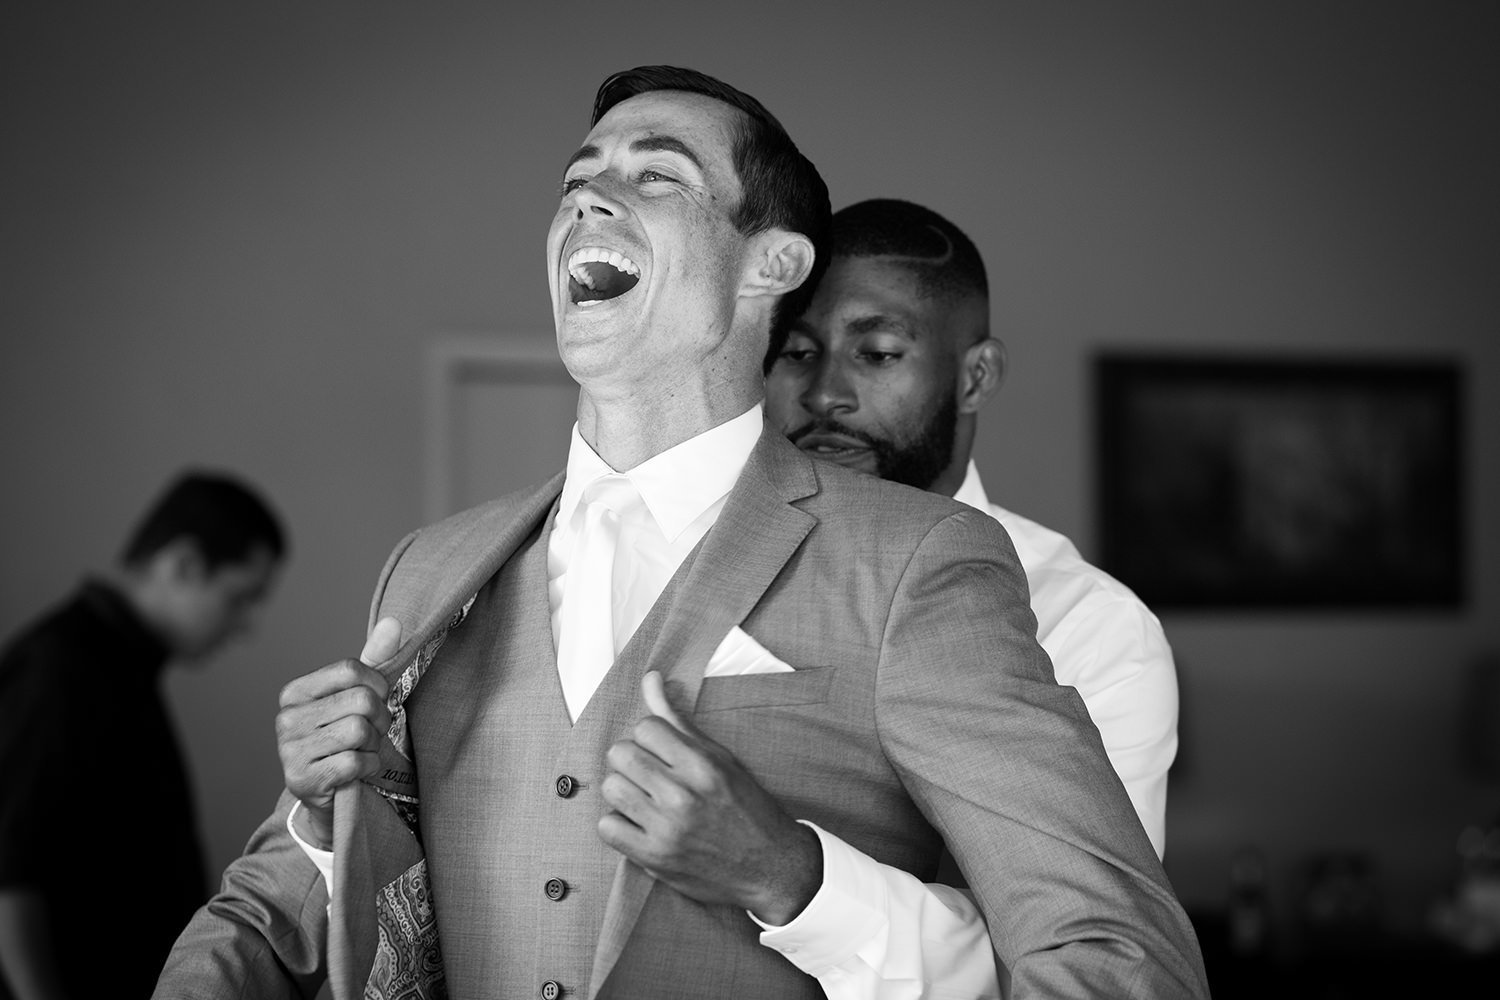 Funny moment as the groom gets ready